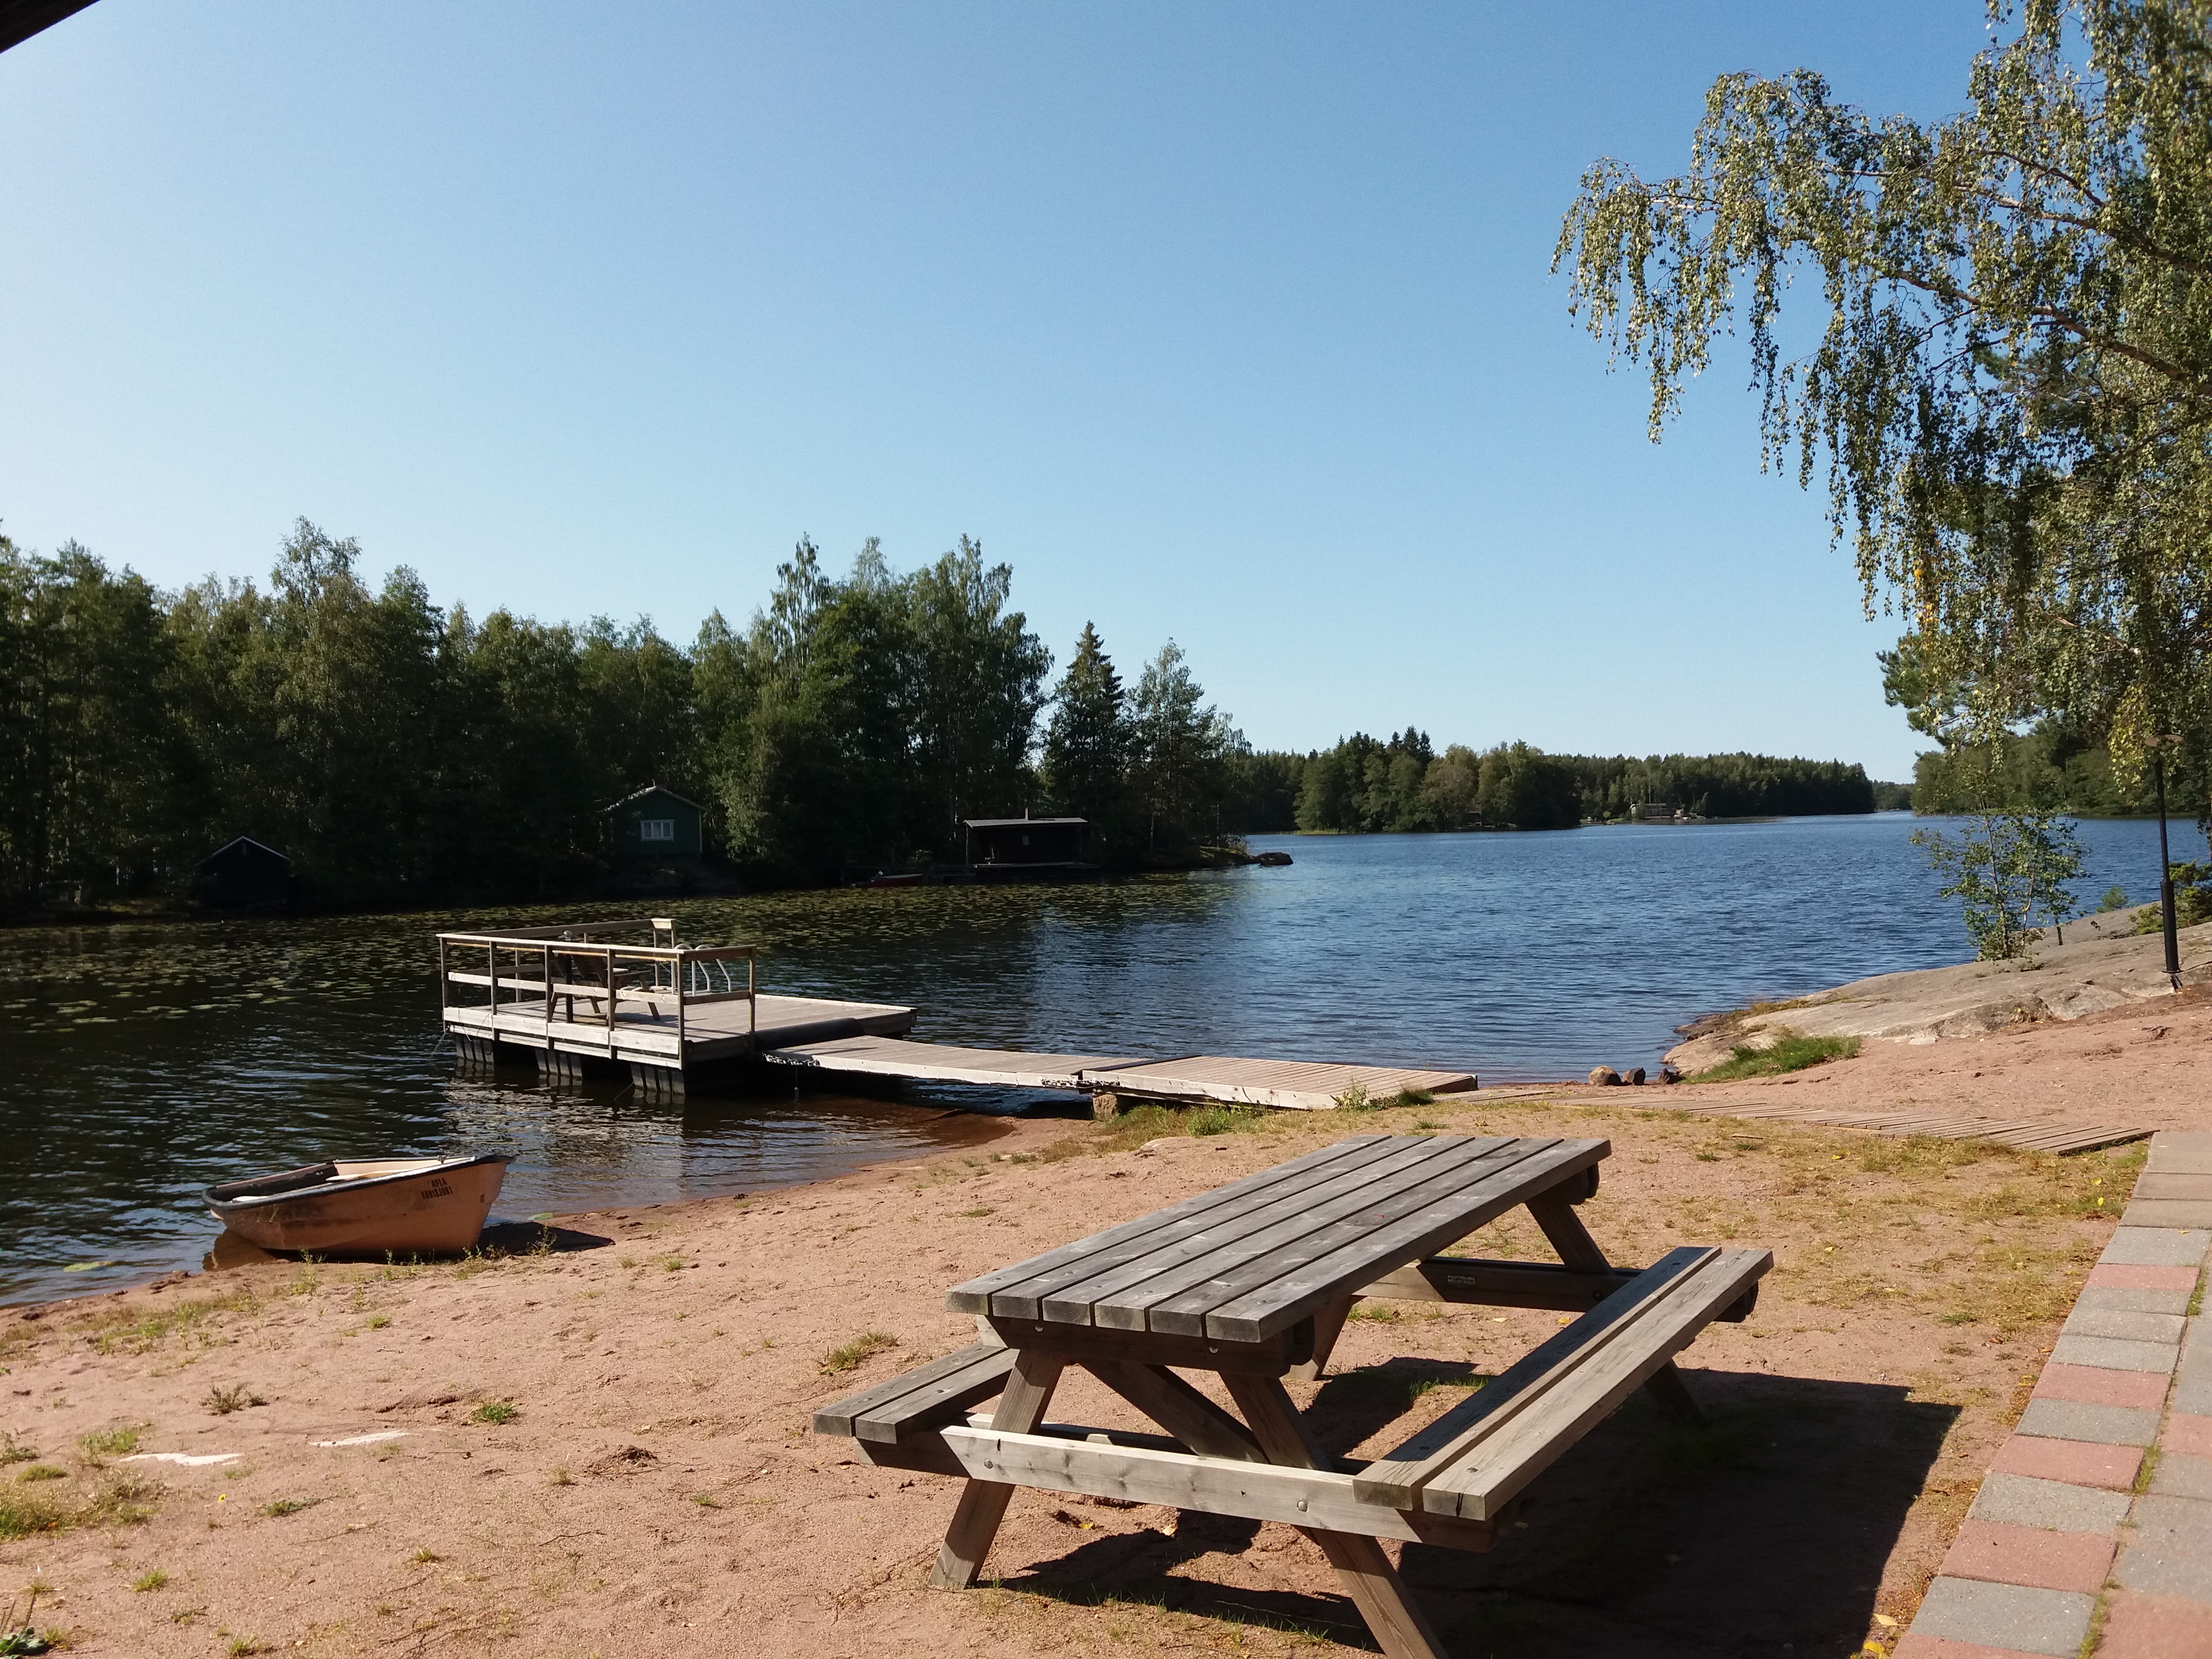 Beach Kaljasjärvi. A boat, a table with seats and a pier in the picture.